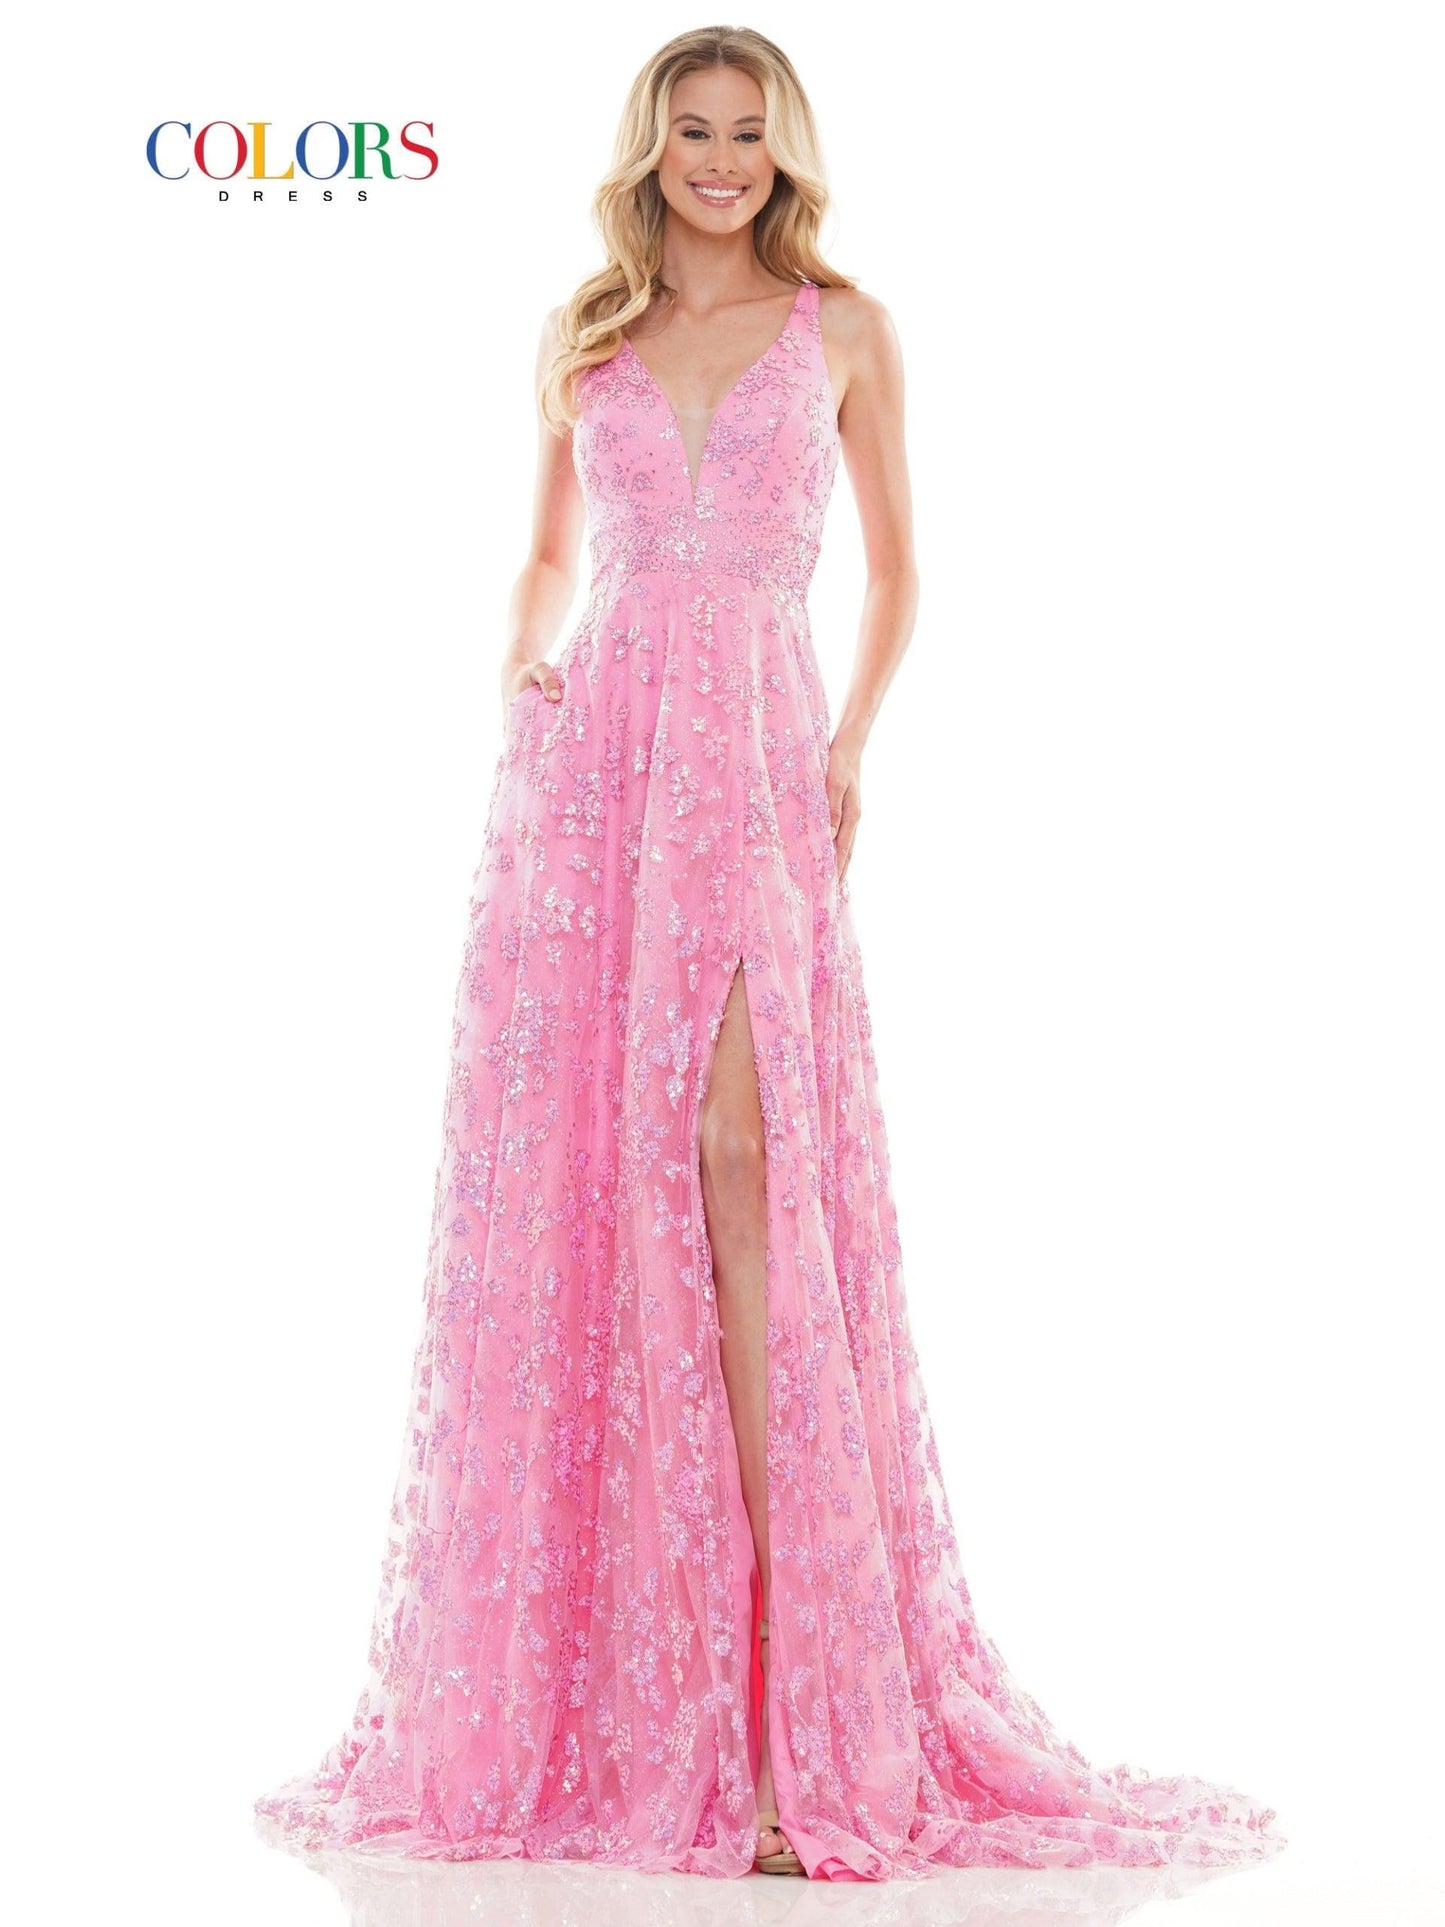 Colors Long Formal Glitter Mesh Prom Dress 2742 - The Dress Outlet